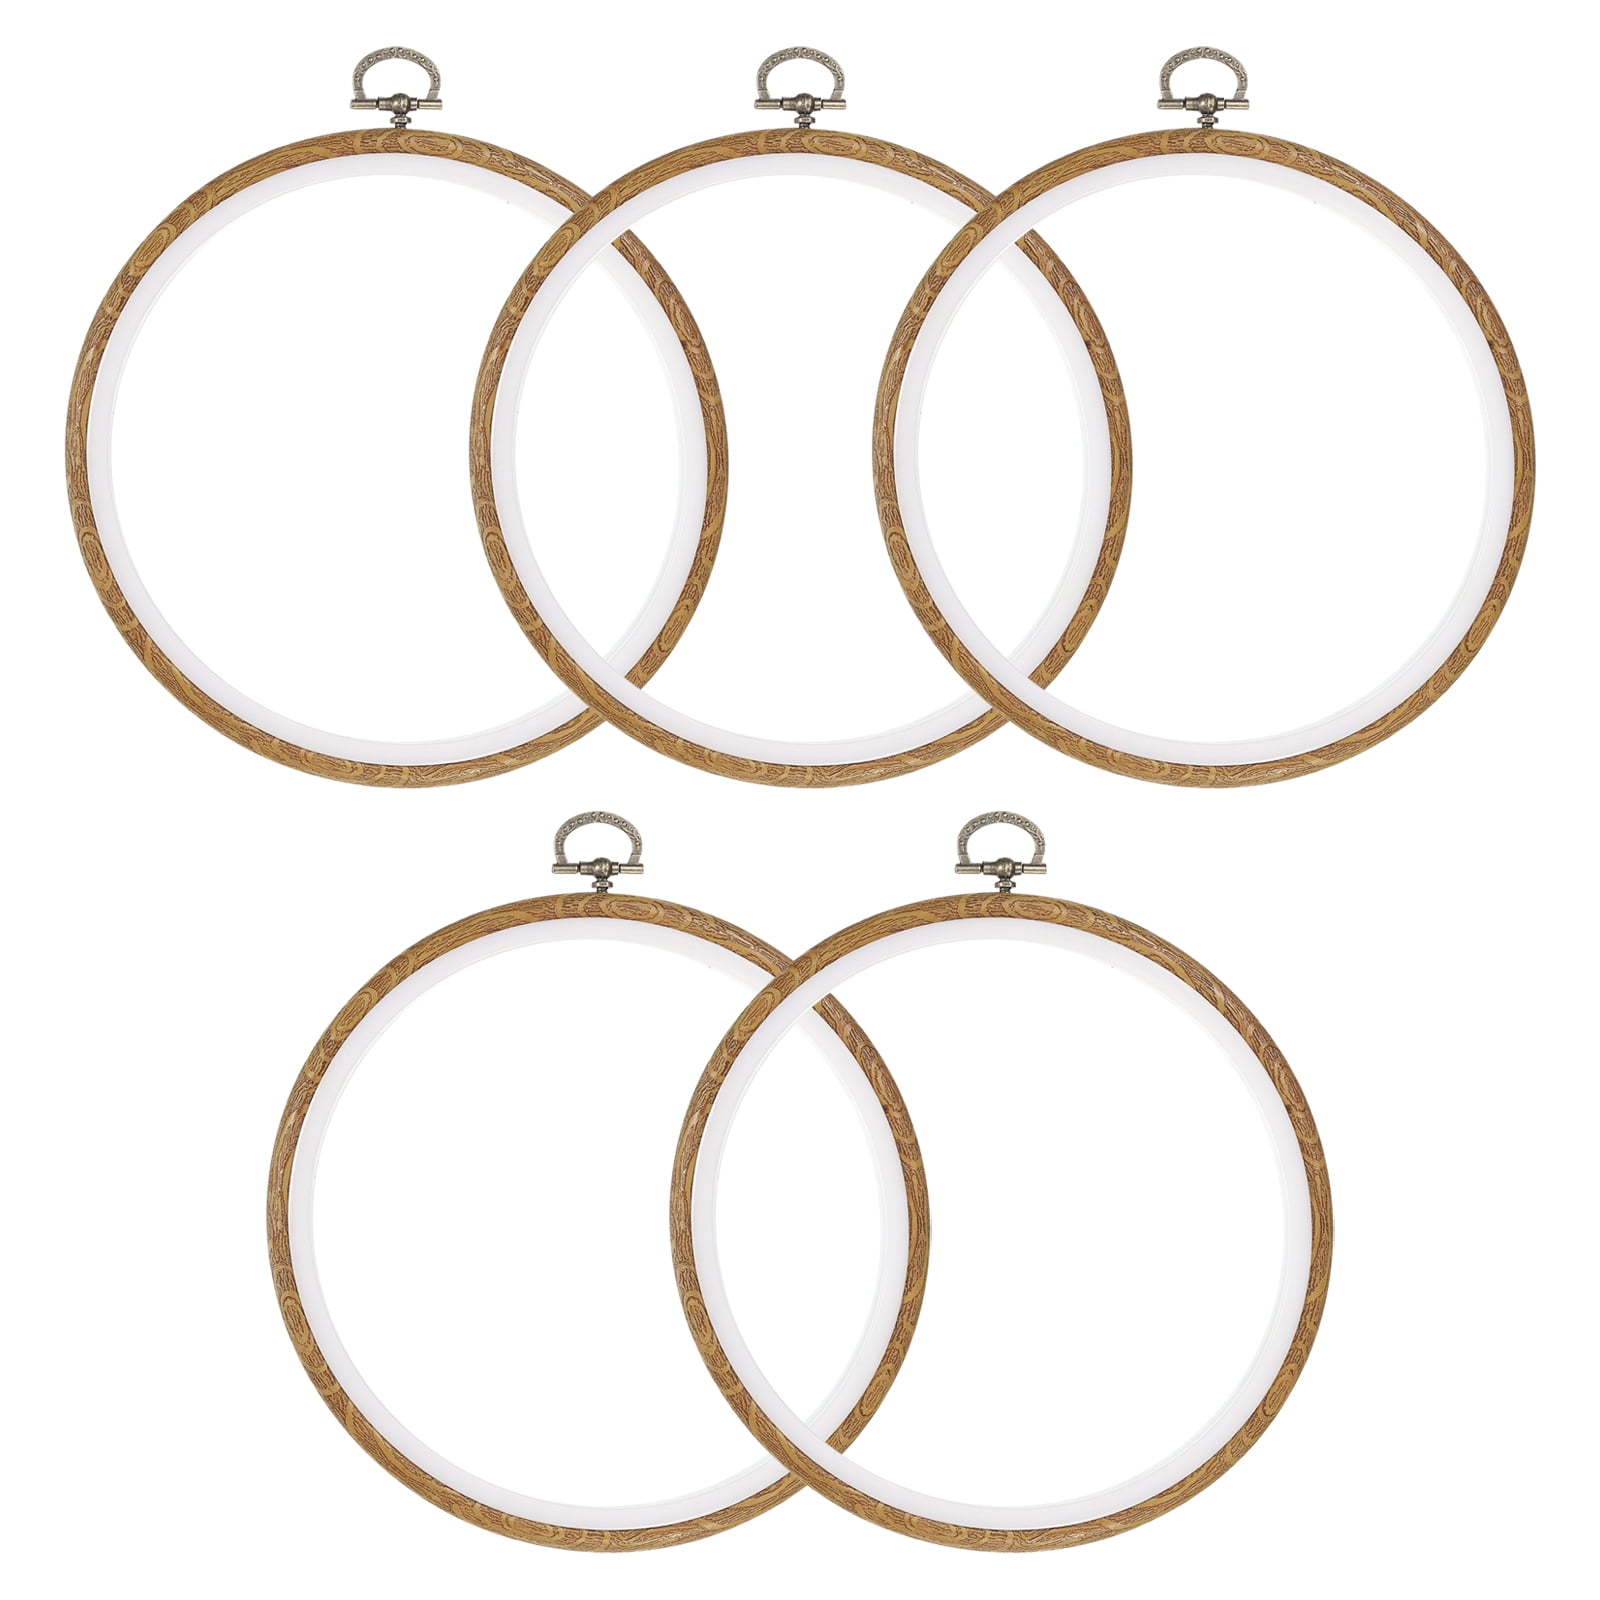 Wooden Embroidery Hoop 4 inches — Oh Sew Retro